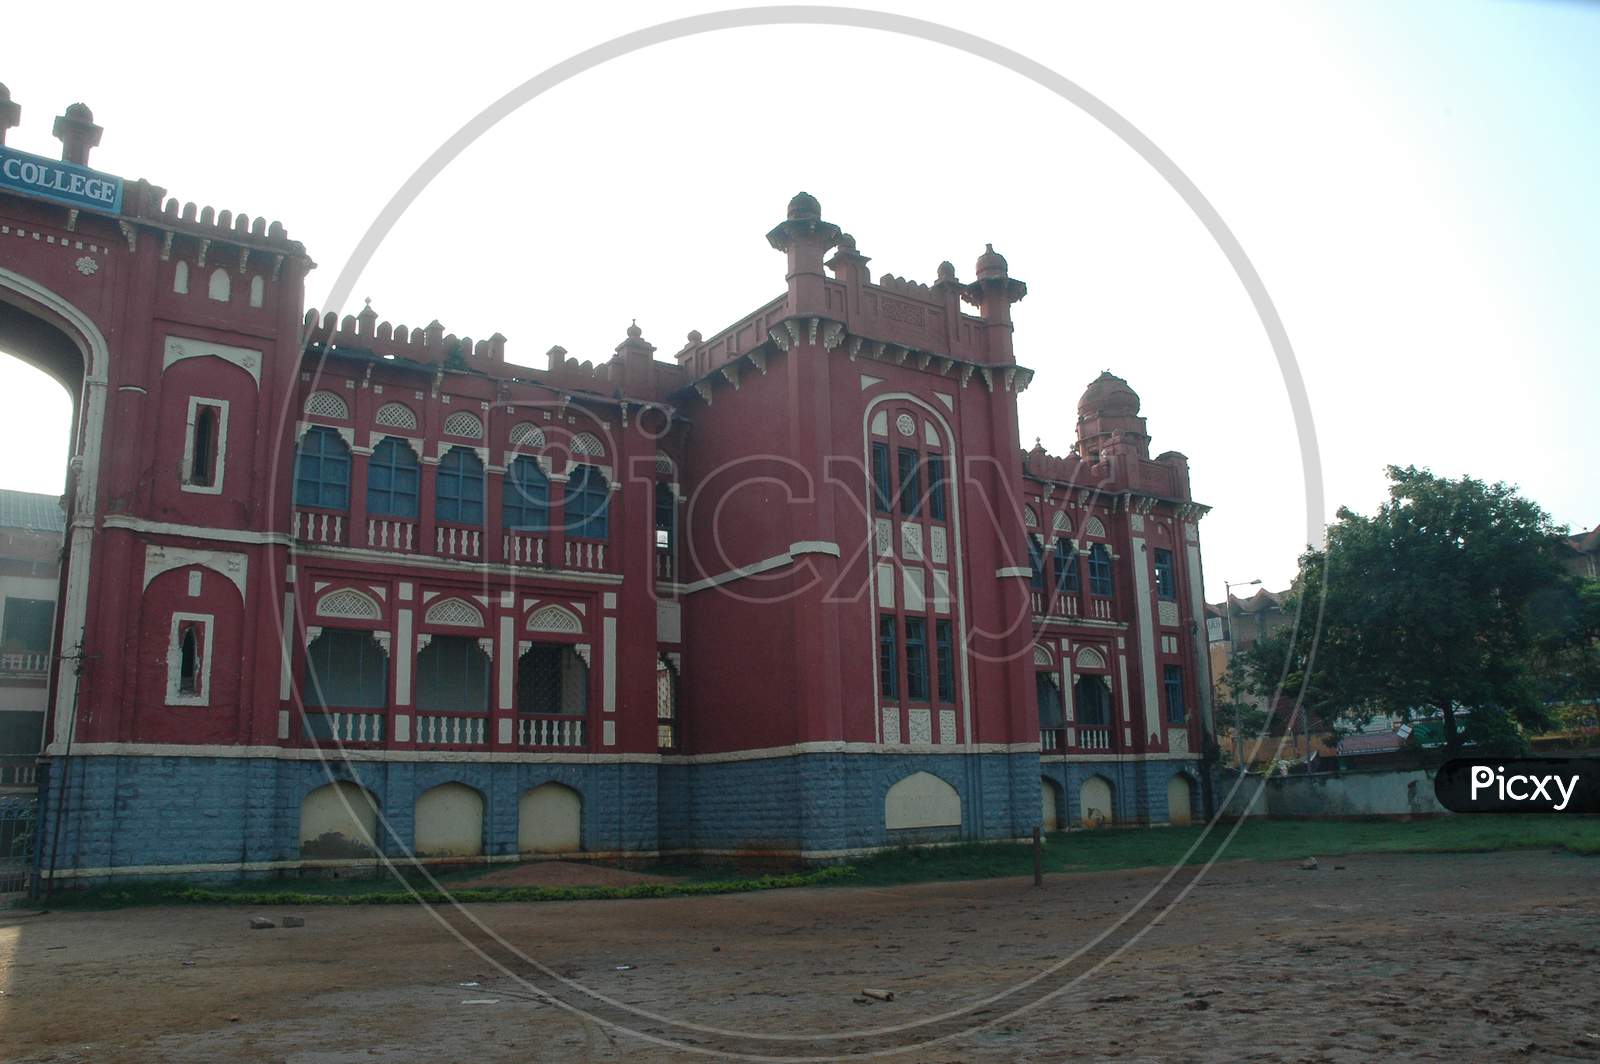 Government City College in Hyderabad